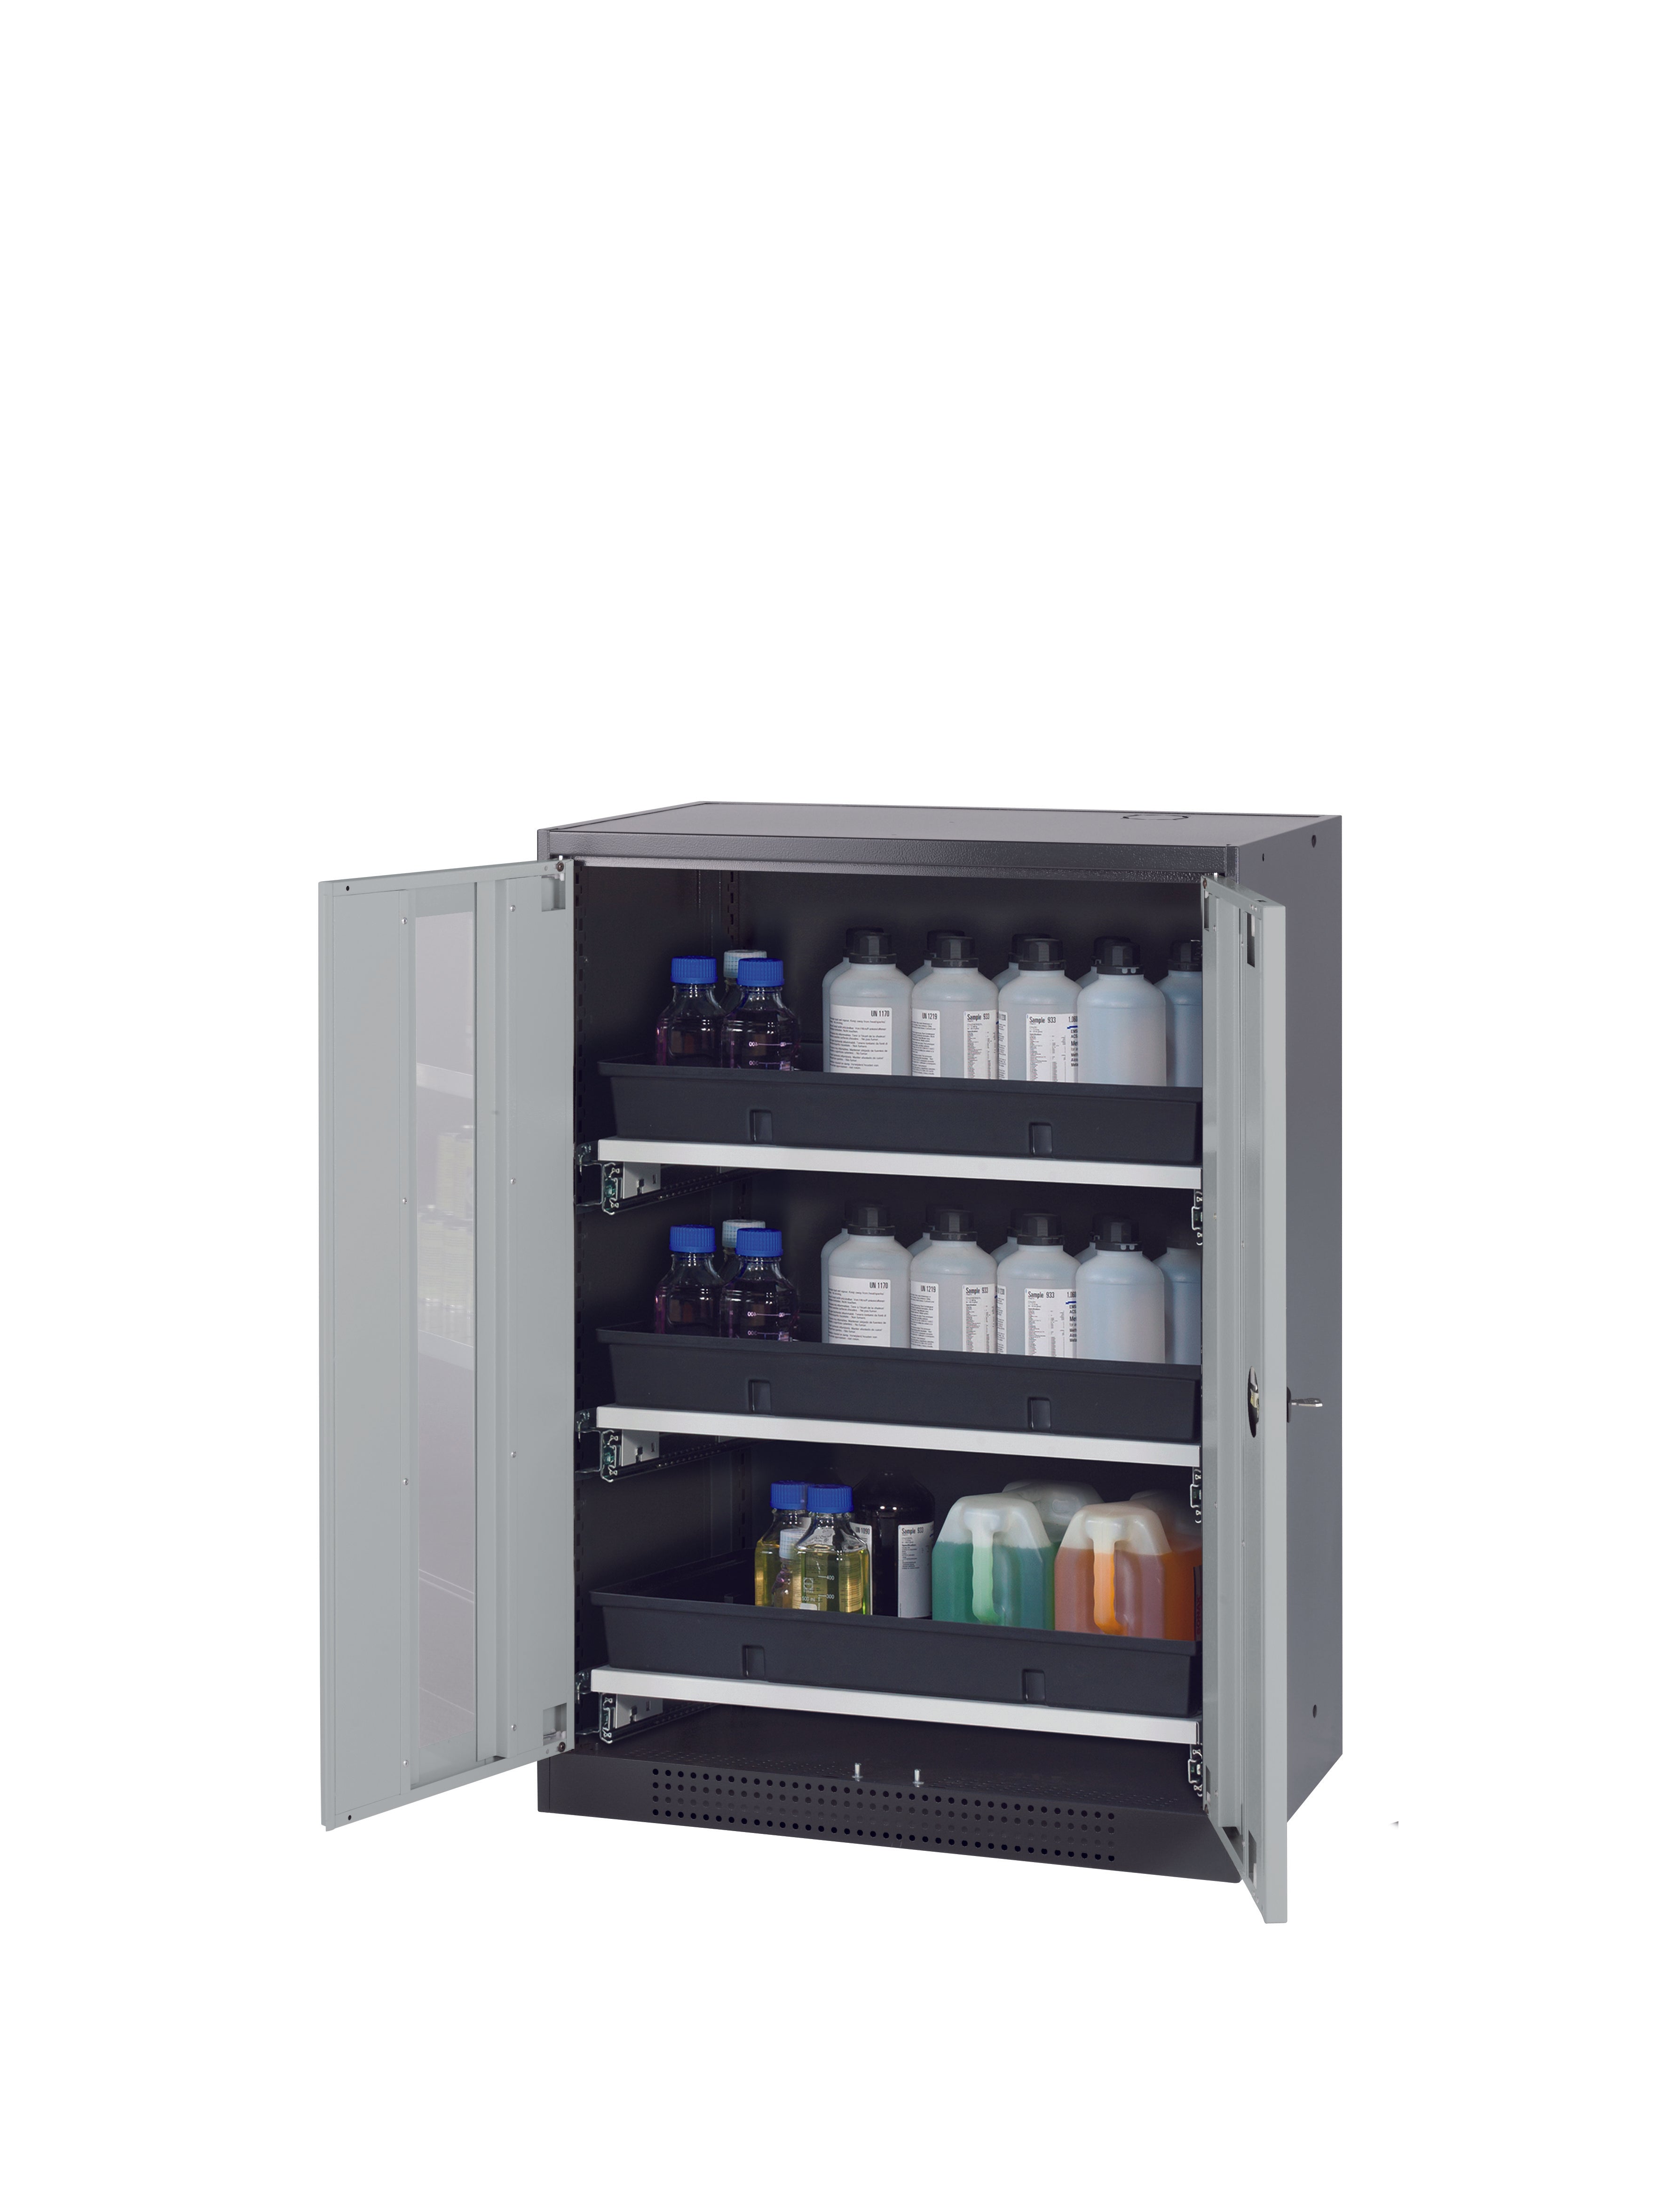 Chemical cabinet CS-CLASSIC-G model CS.110.081.WDFW in light gray RAL 7035 with 3x AbZ pull-out shelves (sheet steel/polypropylene)